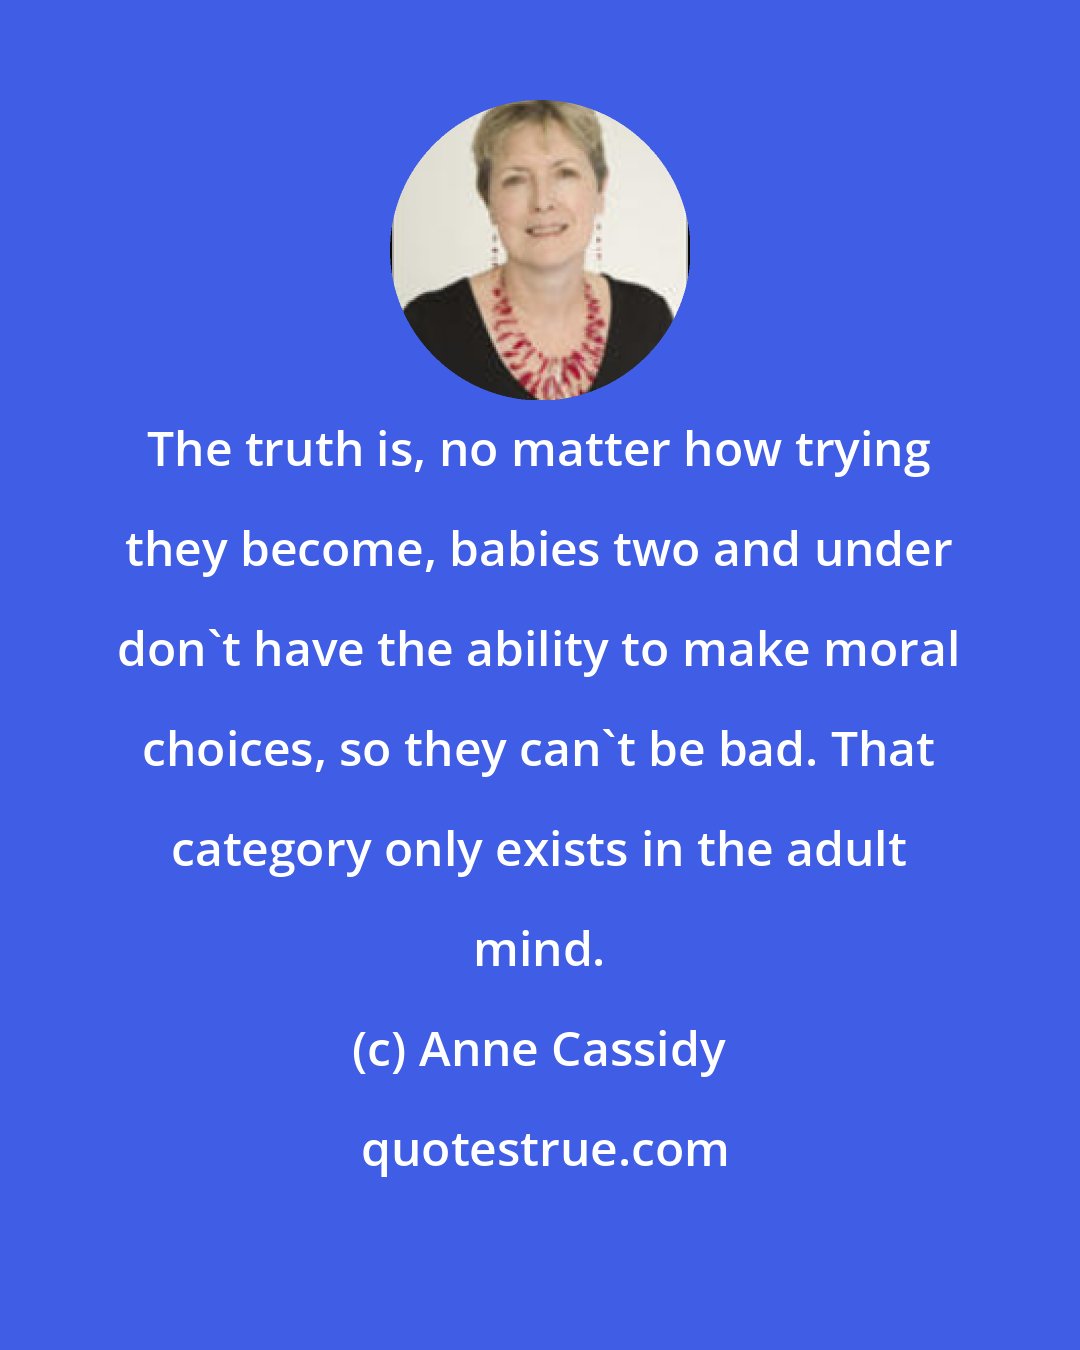 Anne Cassidy: The truth is, no matter how trying they become, babies two and under don't have the ability to make moral choices, so they can't be bad. That category only exists in the adult mind.